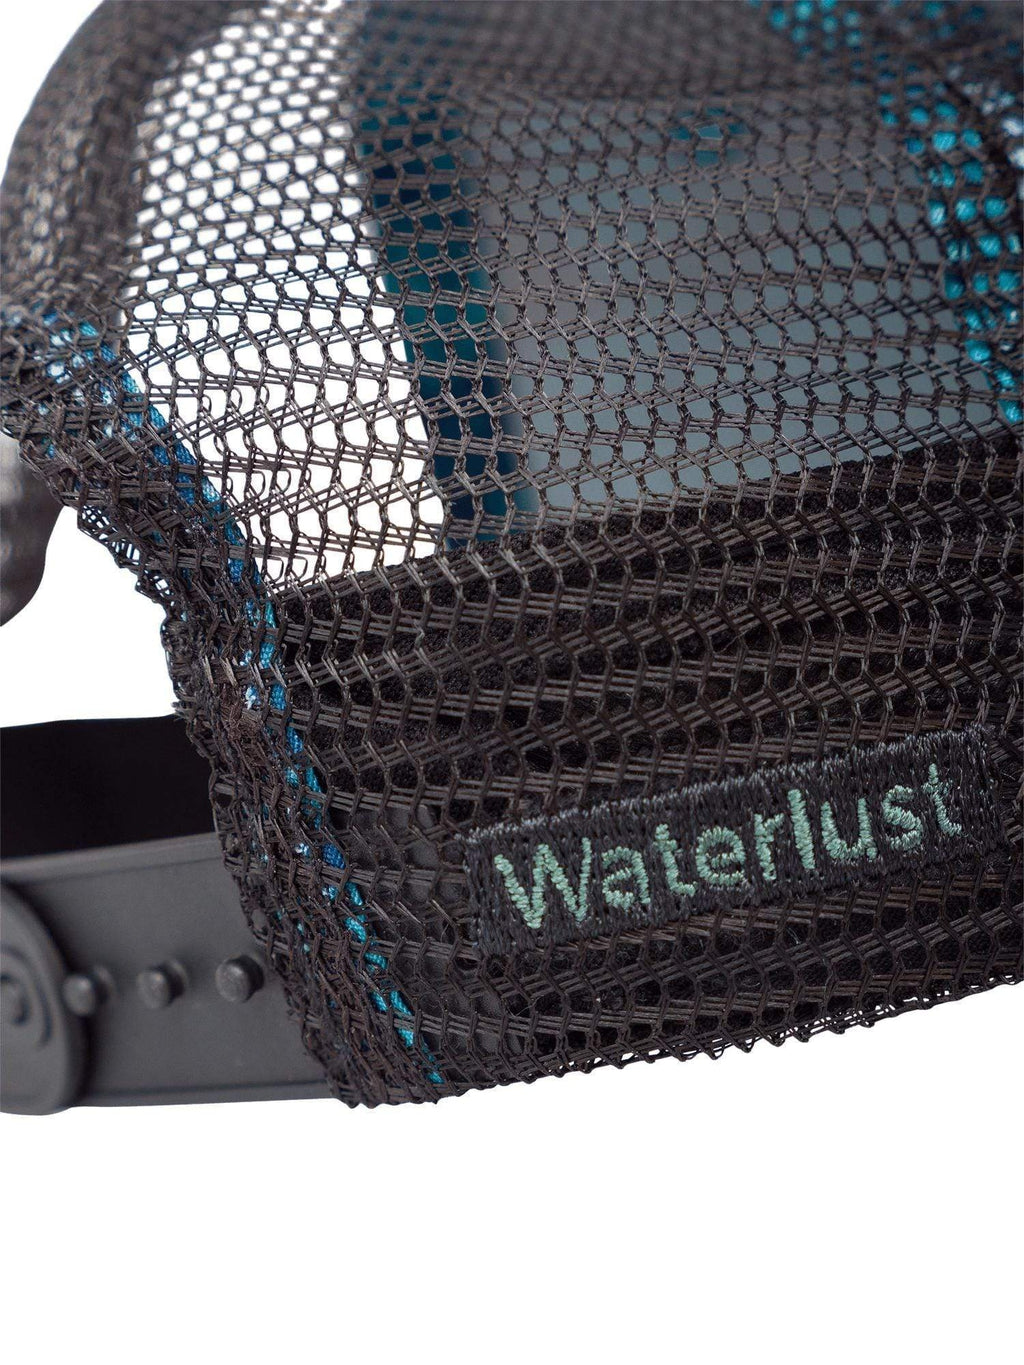 Close up view of the waterlust name embroidered on the back mesh of a black and blue florida springs trucker cap hat